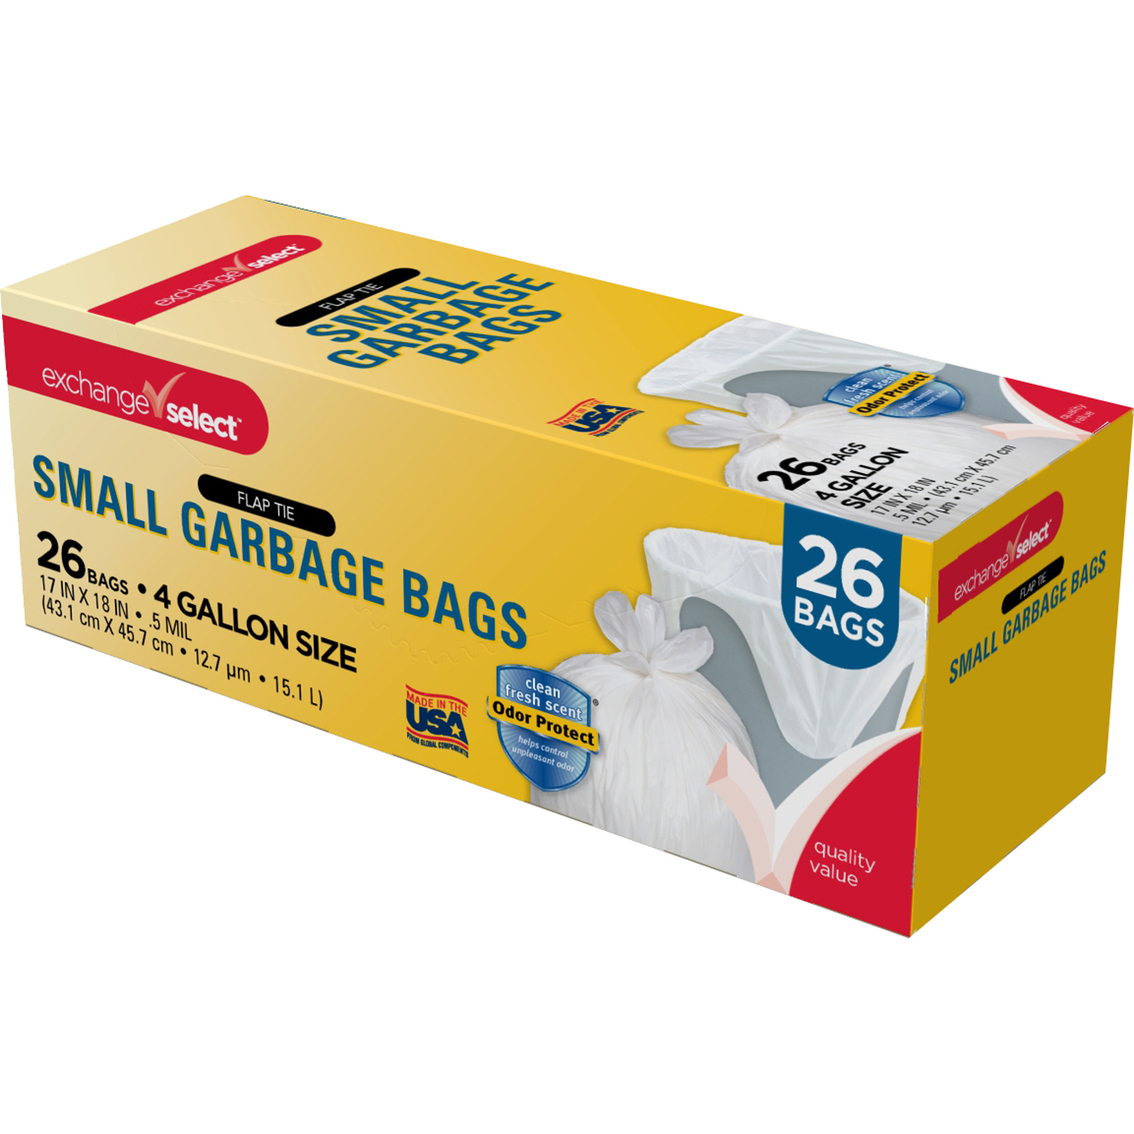 Great Value Small Trash Flap Tie Bags, 4 Gallon, 40 Count